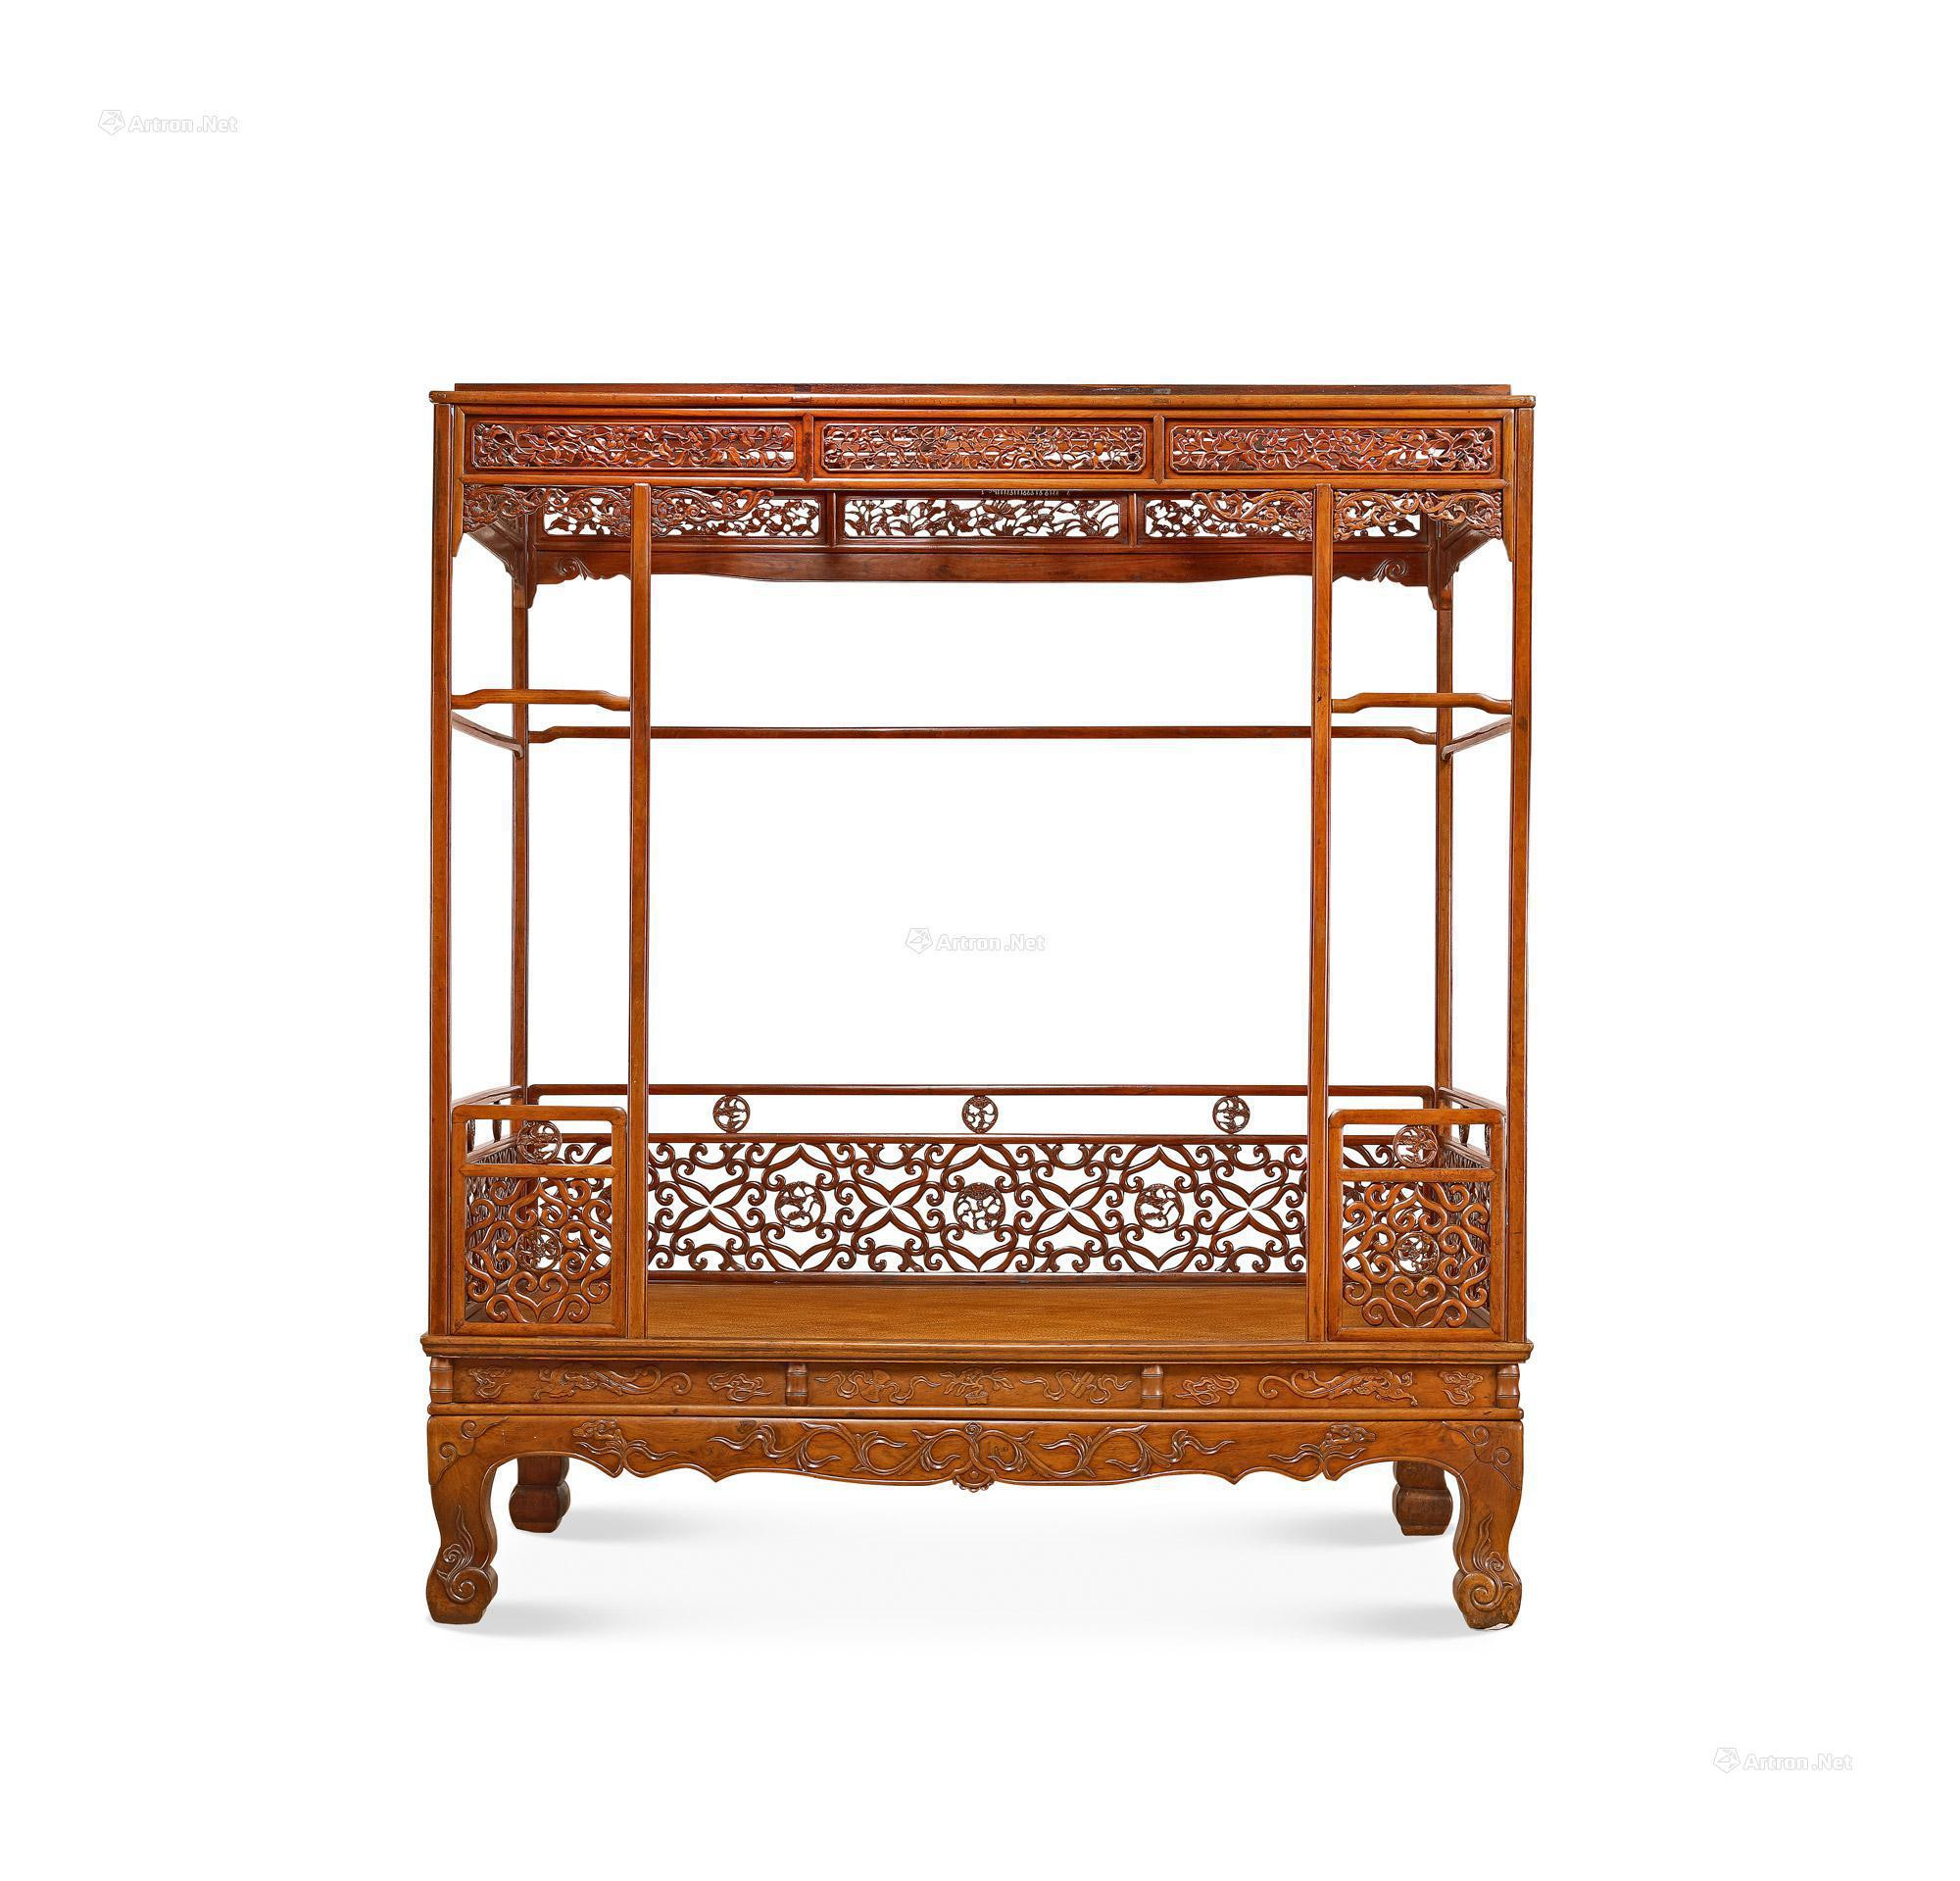 HUANGHUALI SIX POSTER BED